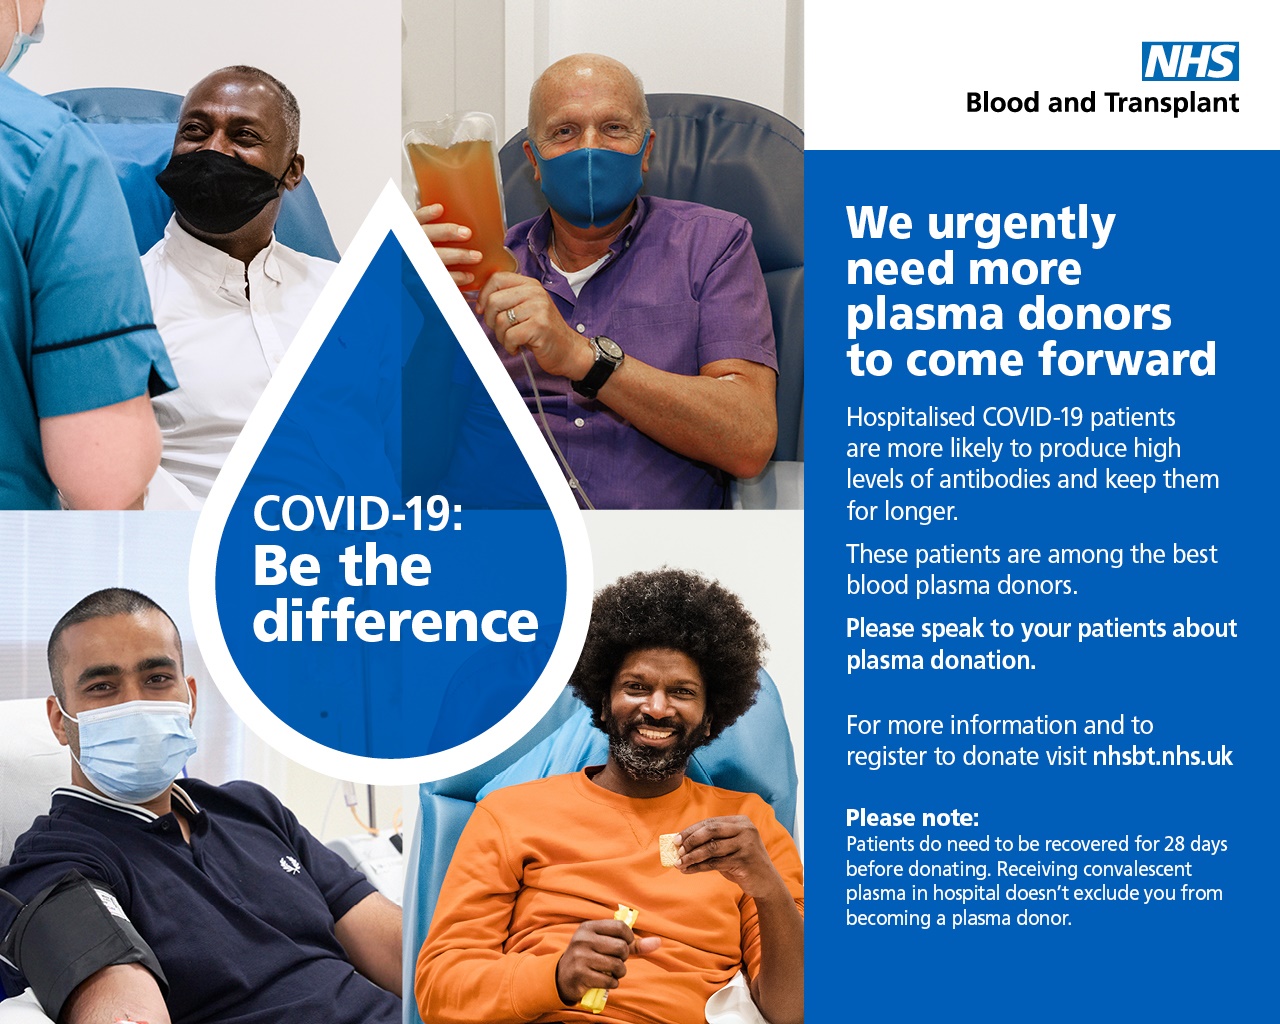   NHSBT are asking 18-65 males who've had COVID to donate plasma for new treatment research that could save lives. Find out how.